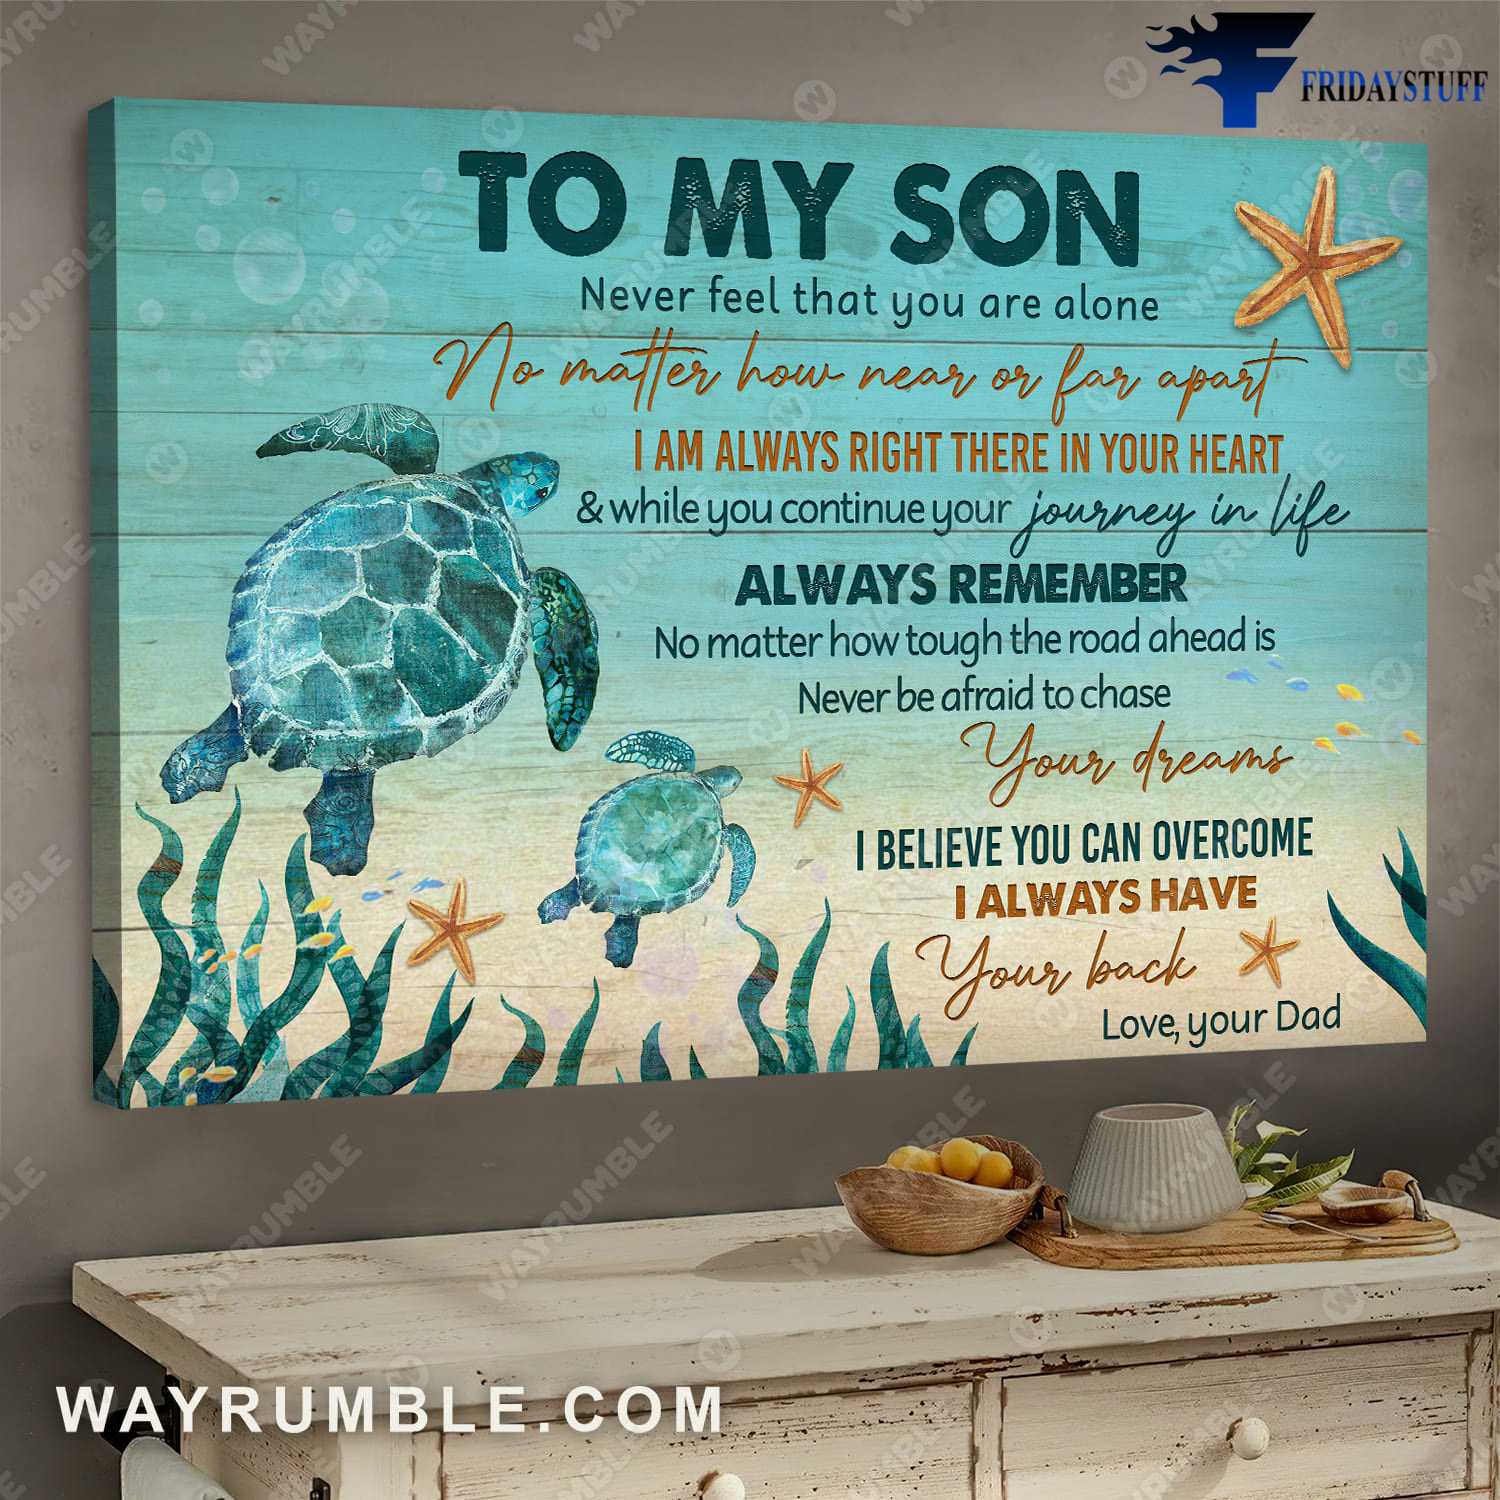 Turtle Poster, Dad And Son, To My Son, Never Feel That You Are Alone, No Matter How Near Or Far Apart, I Am Always Right There In Your Heart